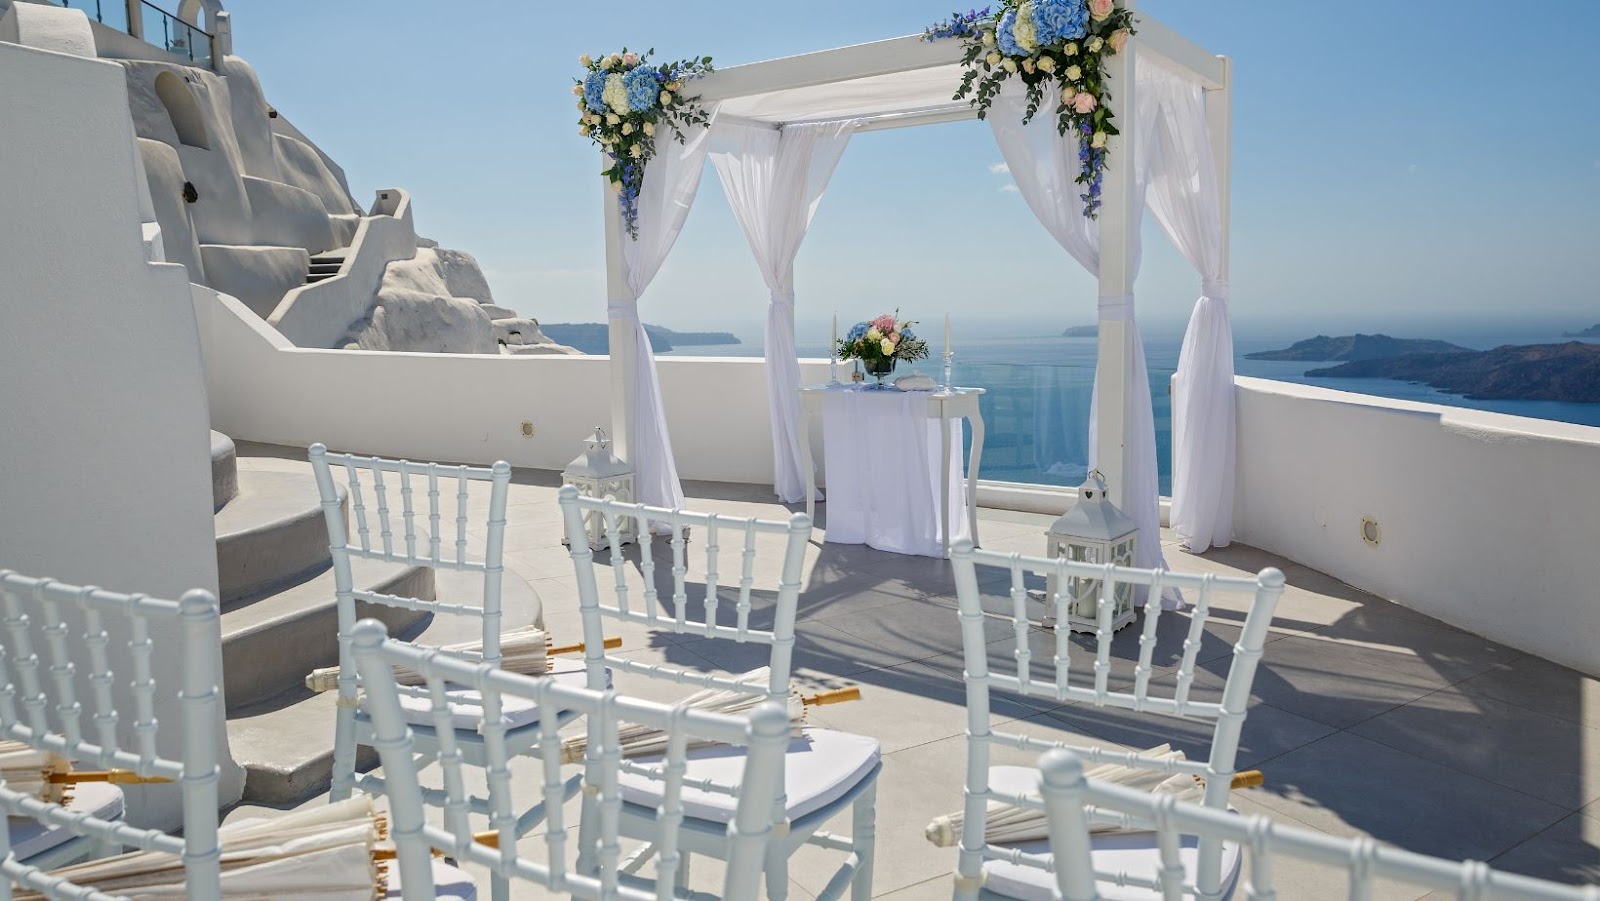 Which is the First and Ideal Venue for Weddings and Solemnisation?